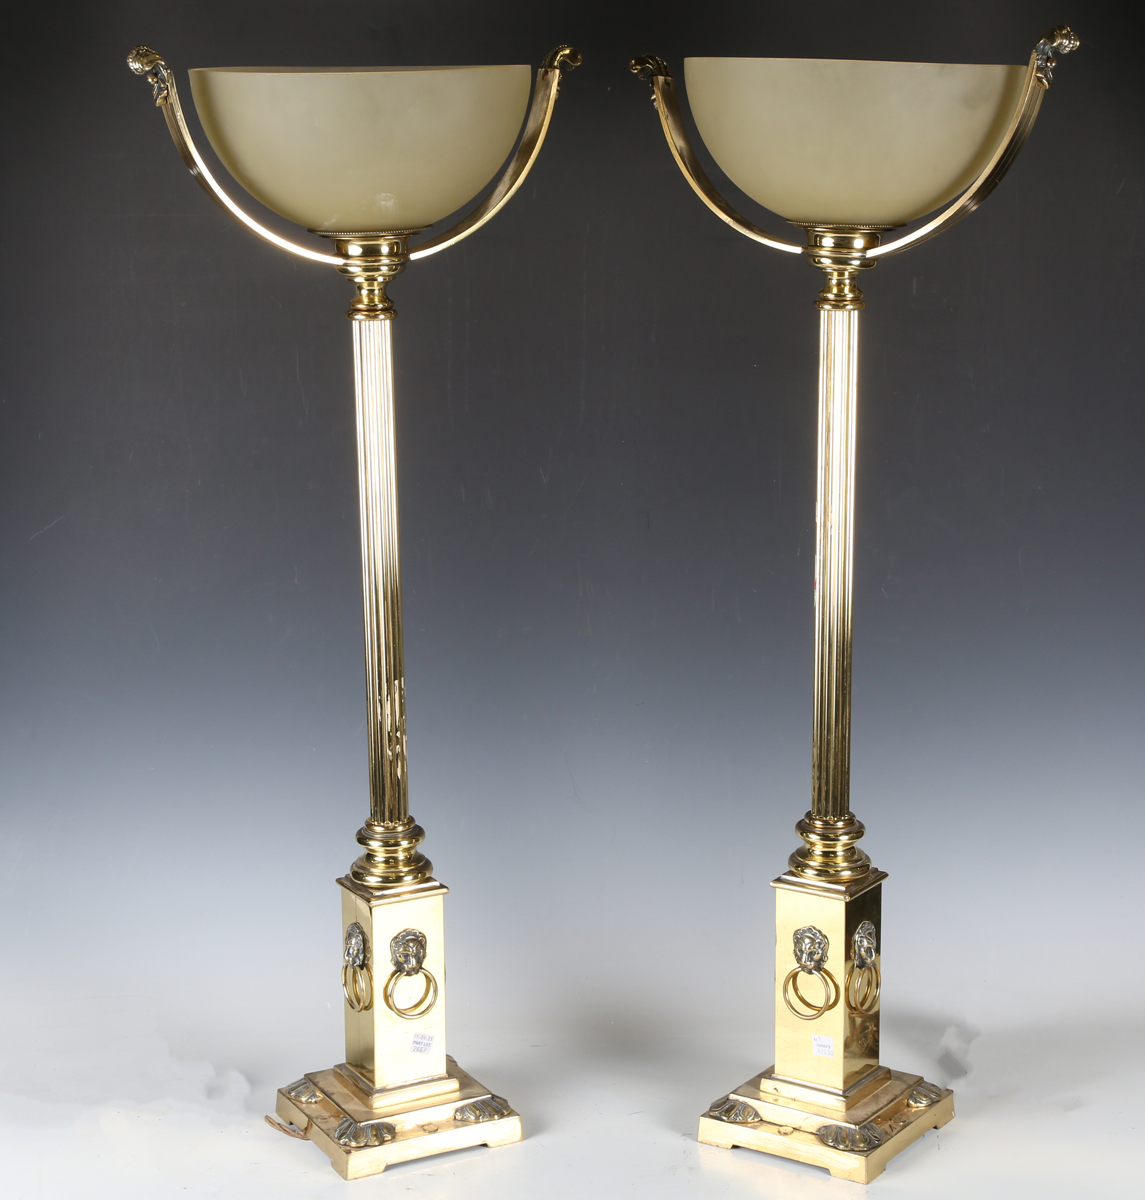 A pair of late 20th century Victorian style gilt brass table lamps, each with an opaque glass